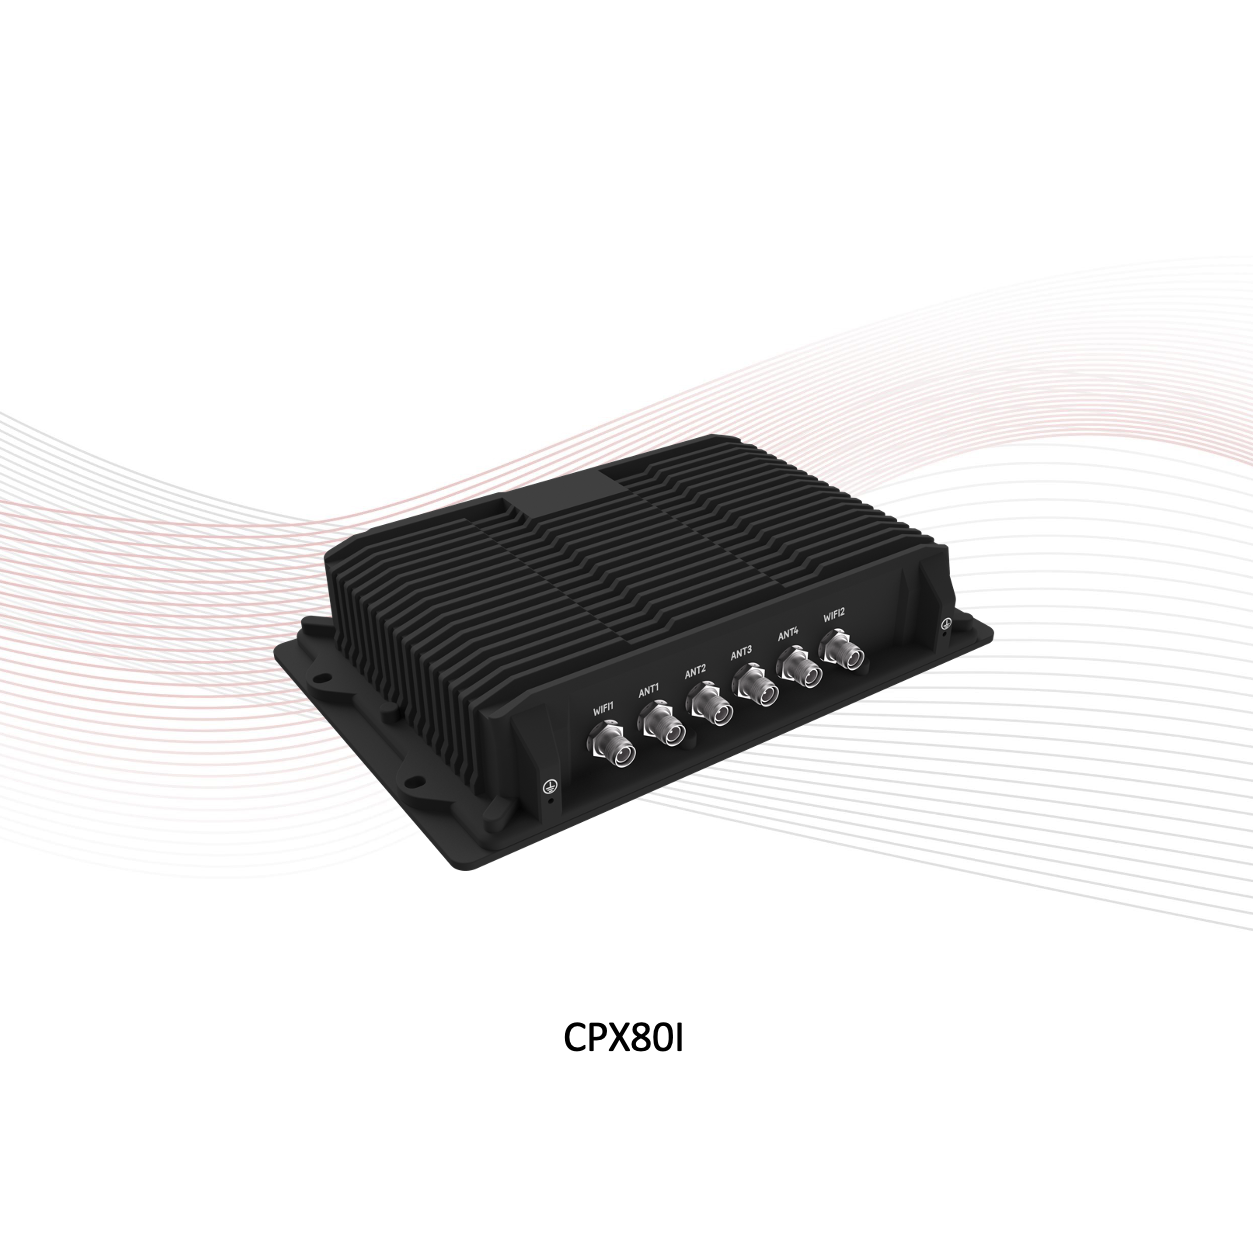 5G Industrial Outdoor CPE - CPX80I